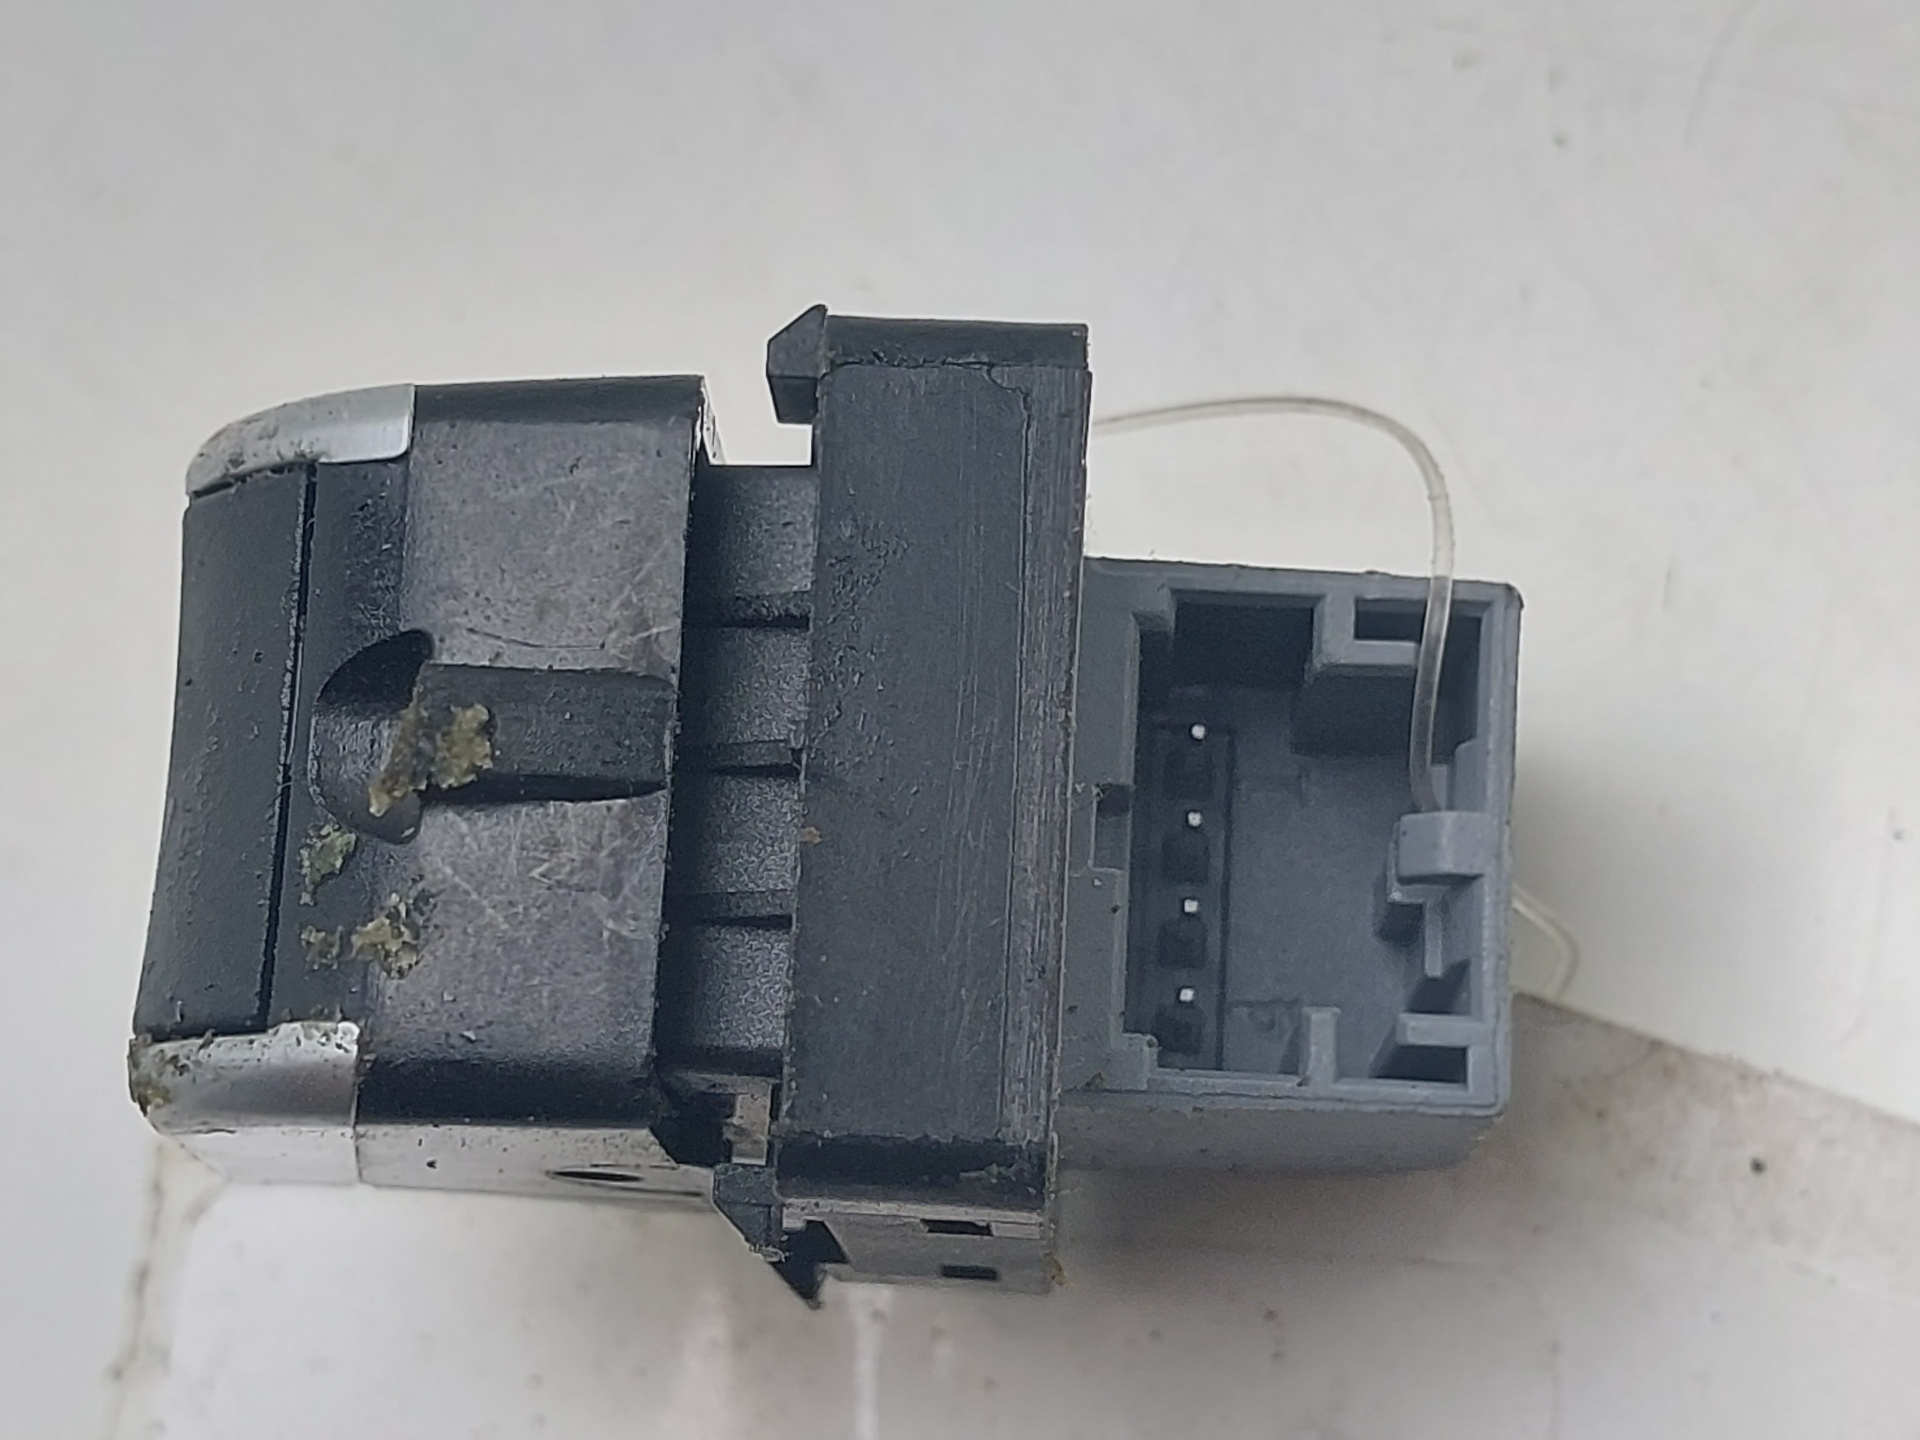 AUDI A1 8X (2010-2020) Rear Right Door Window Control Switch 4H0959855A, 101.200KMS, 5PUERTAS 22738911